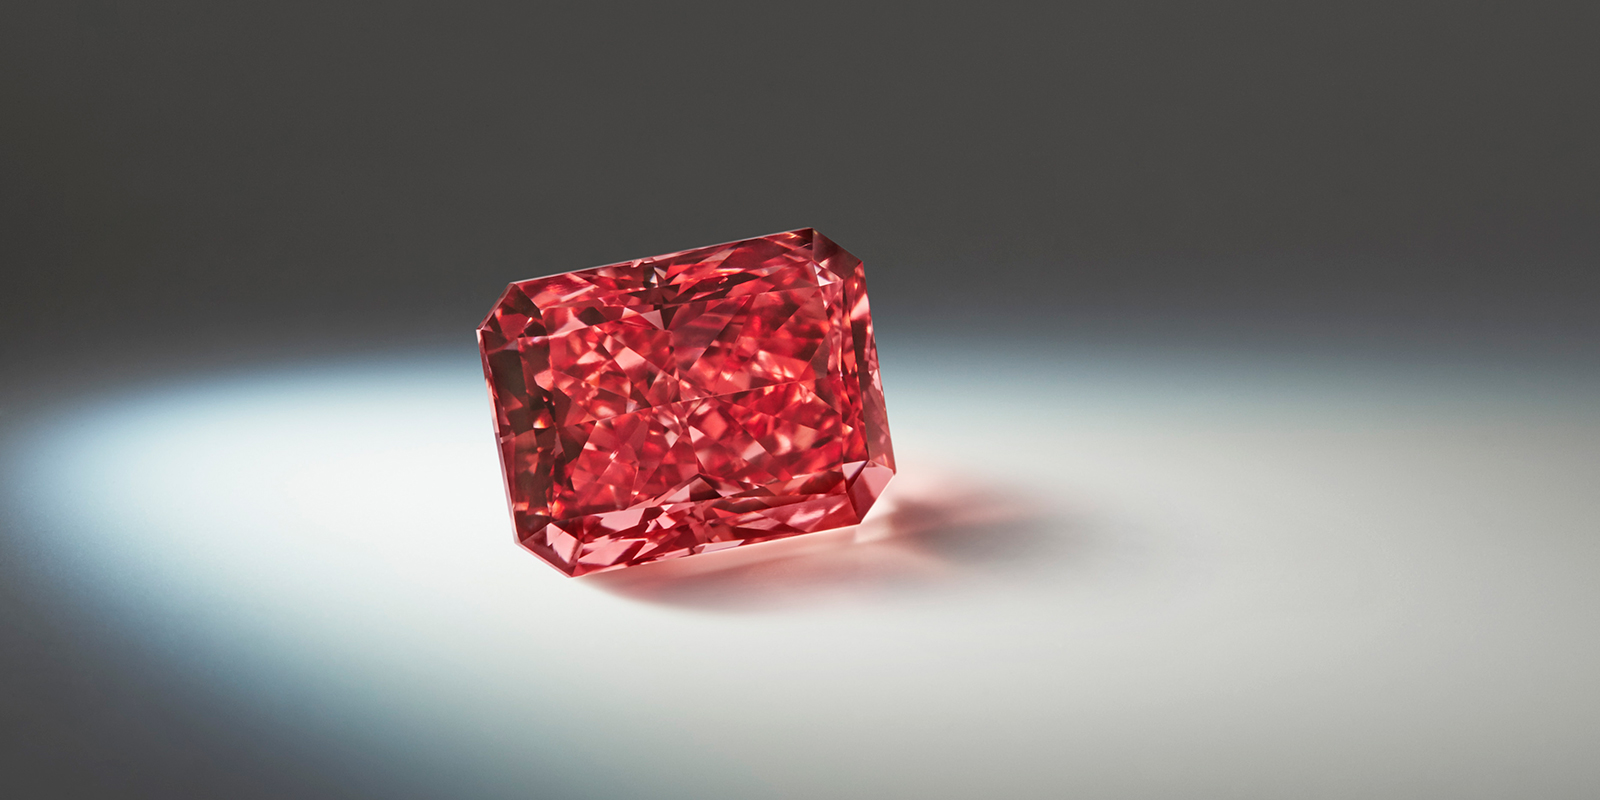 The Fancy Red Argyle Everglow Diamond (2.11 cts)